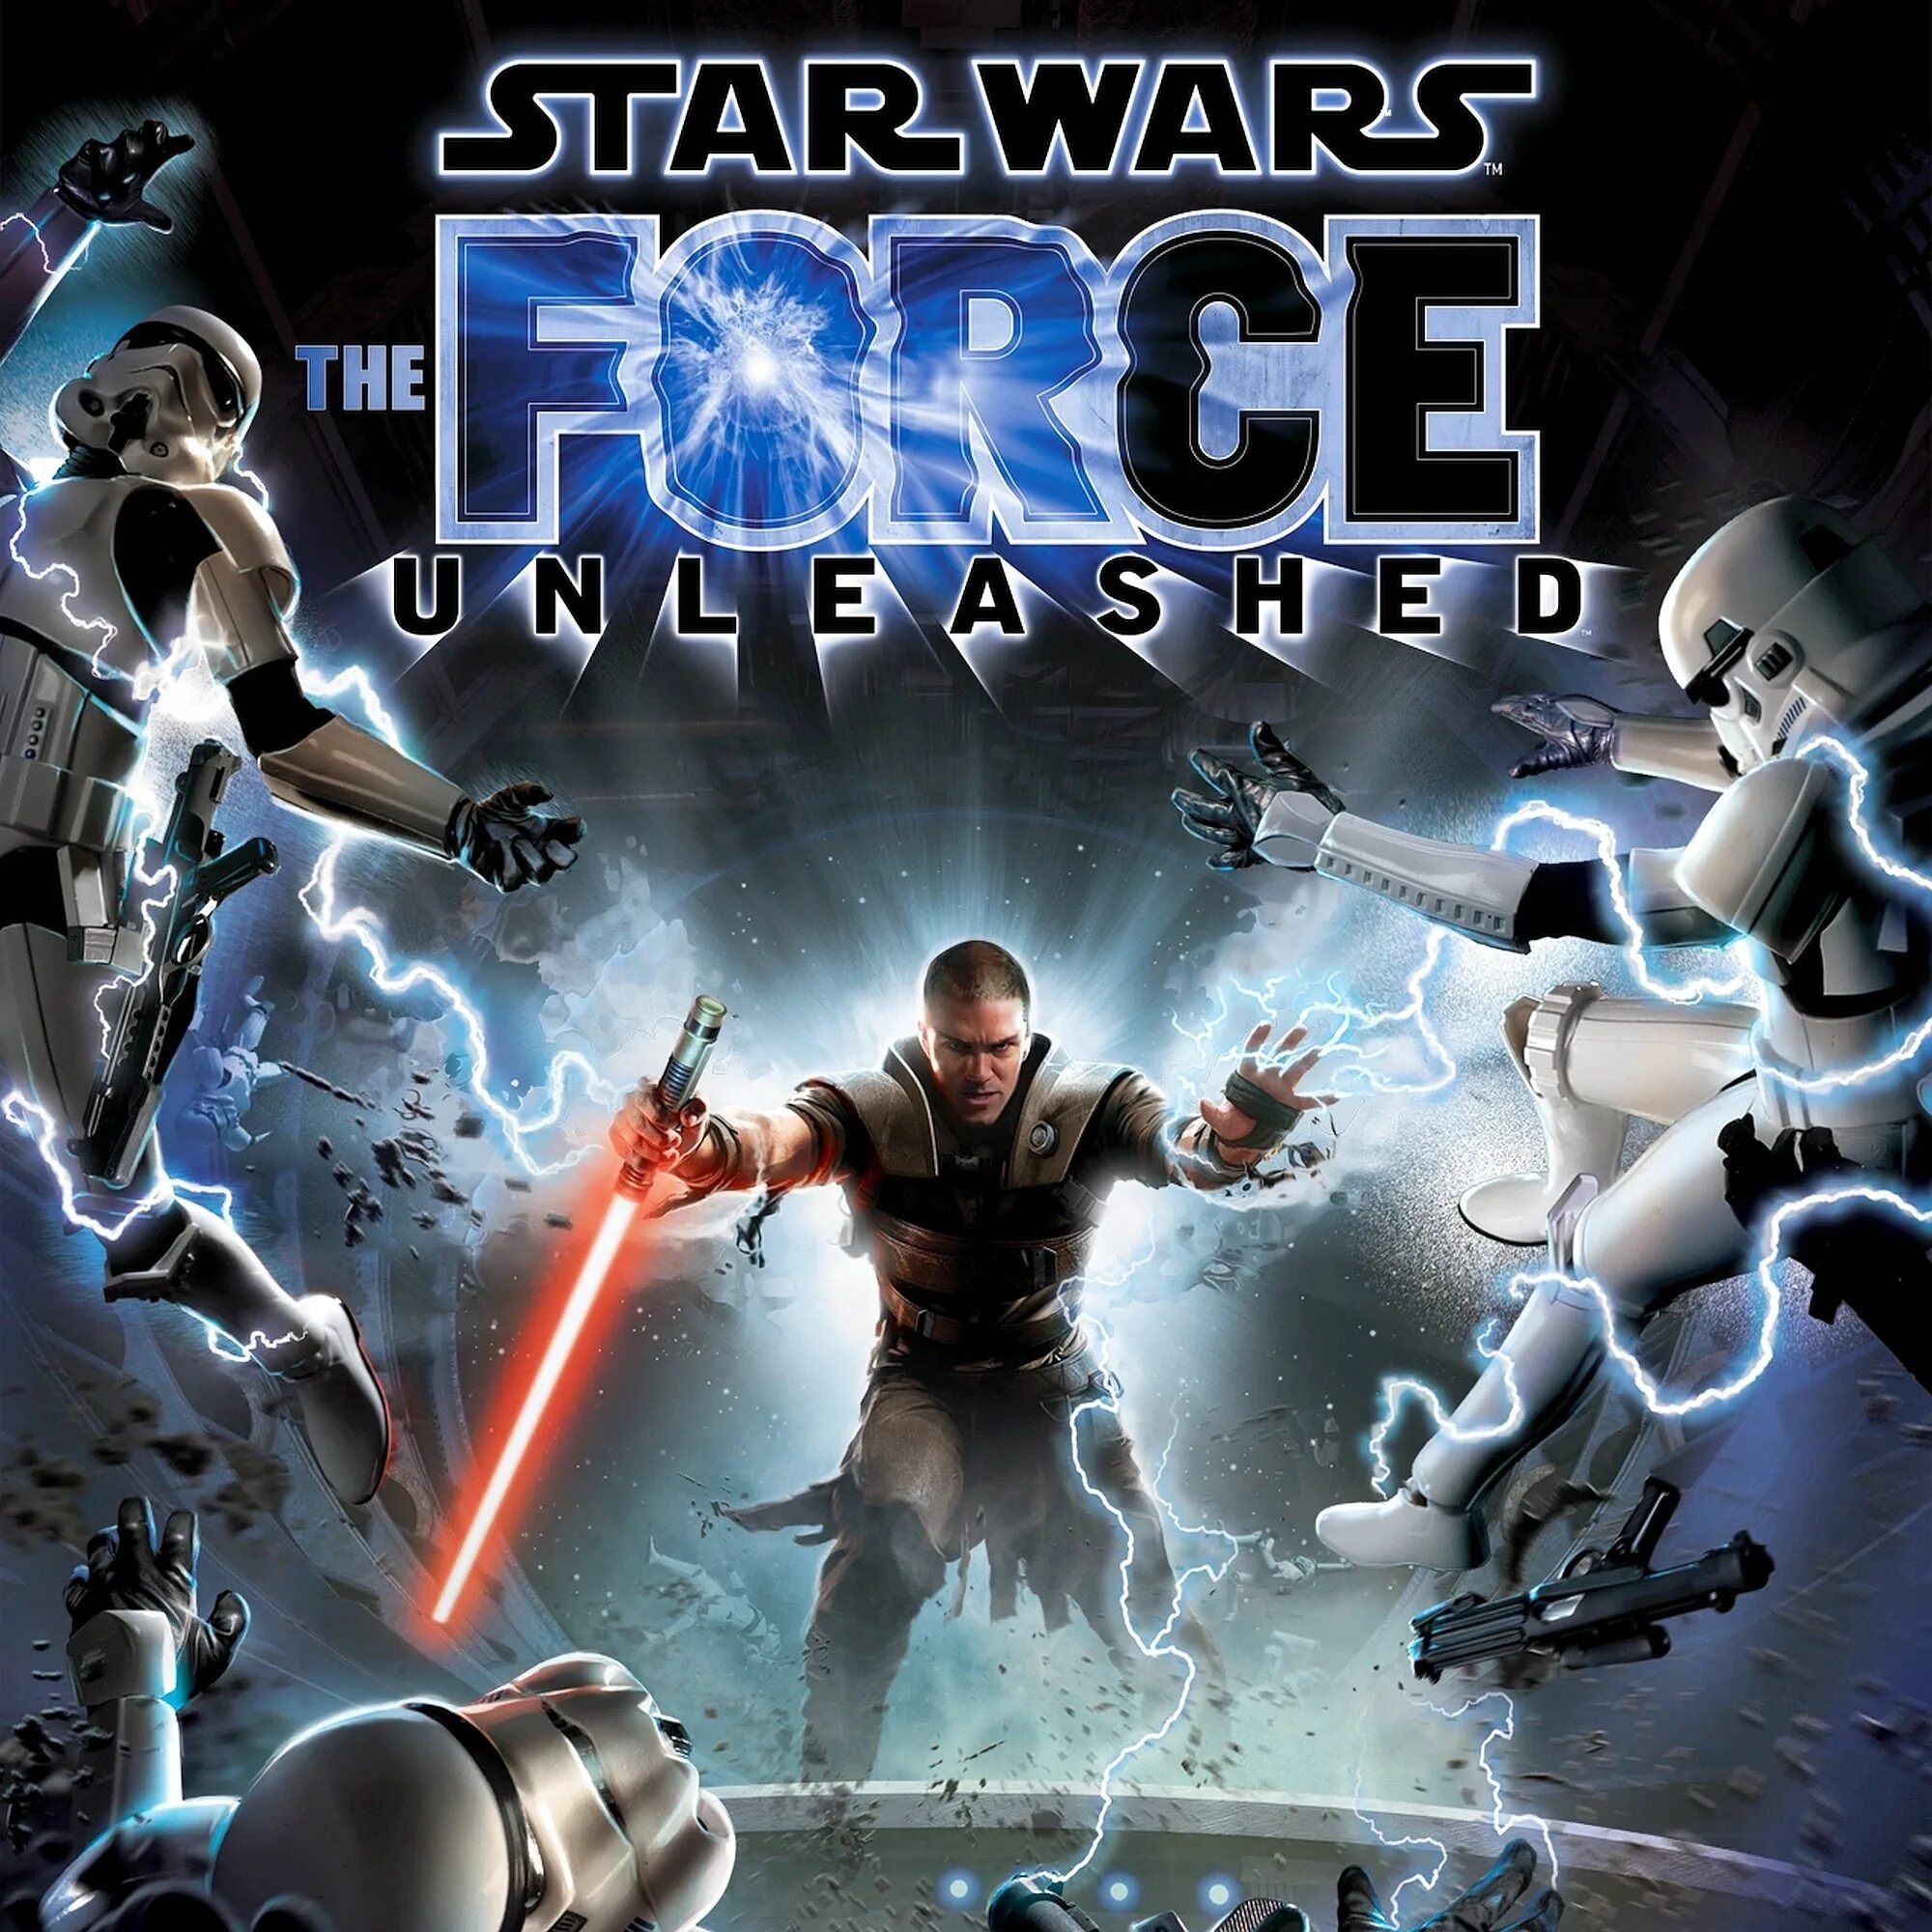 Star wars the force unleashed коды. Звёздные войны the Force unleashed 1. Star Wars the Force unleashed ps4. Звёздные войны the Force unleashed 2. Star Wars the Force unleashed Nintendo DS.